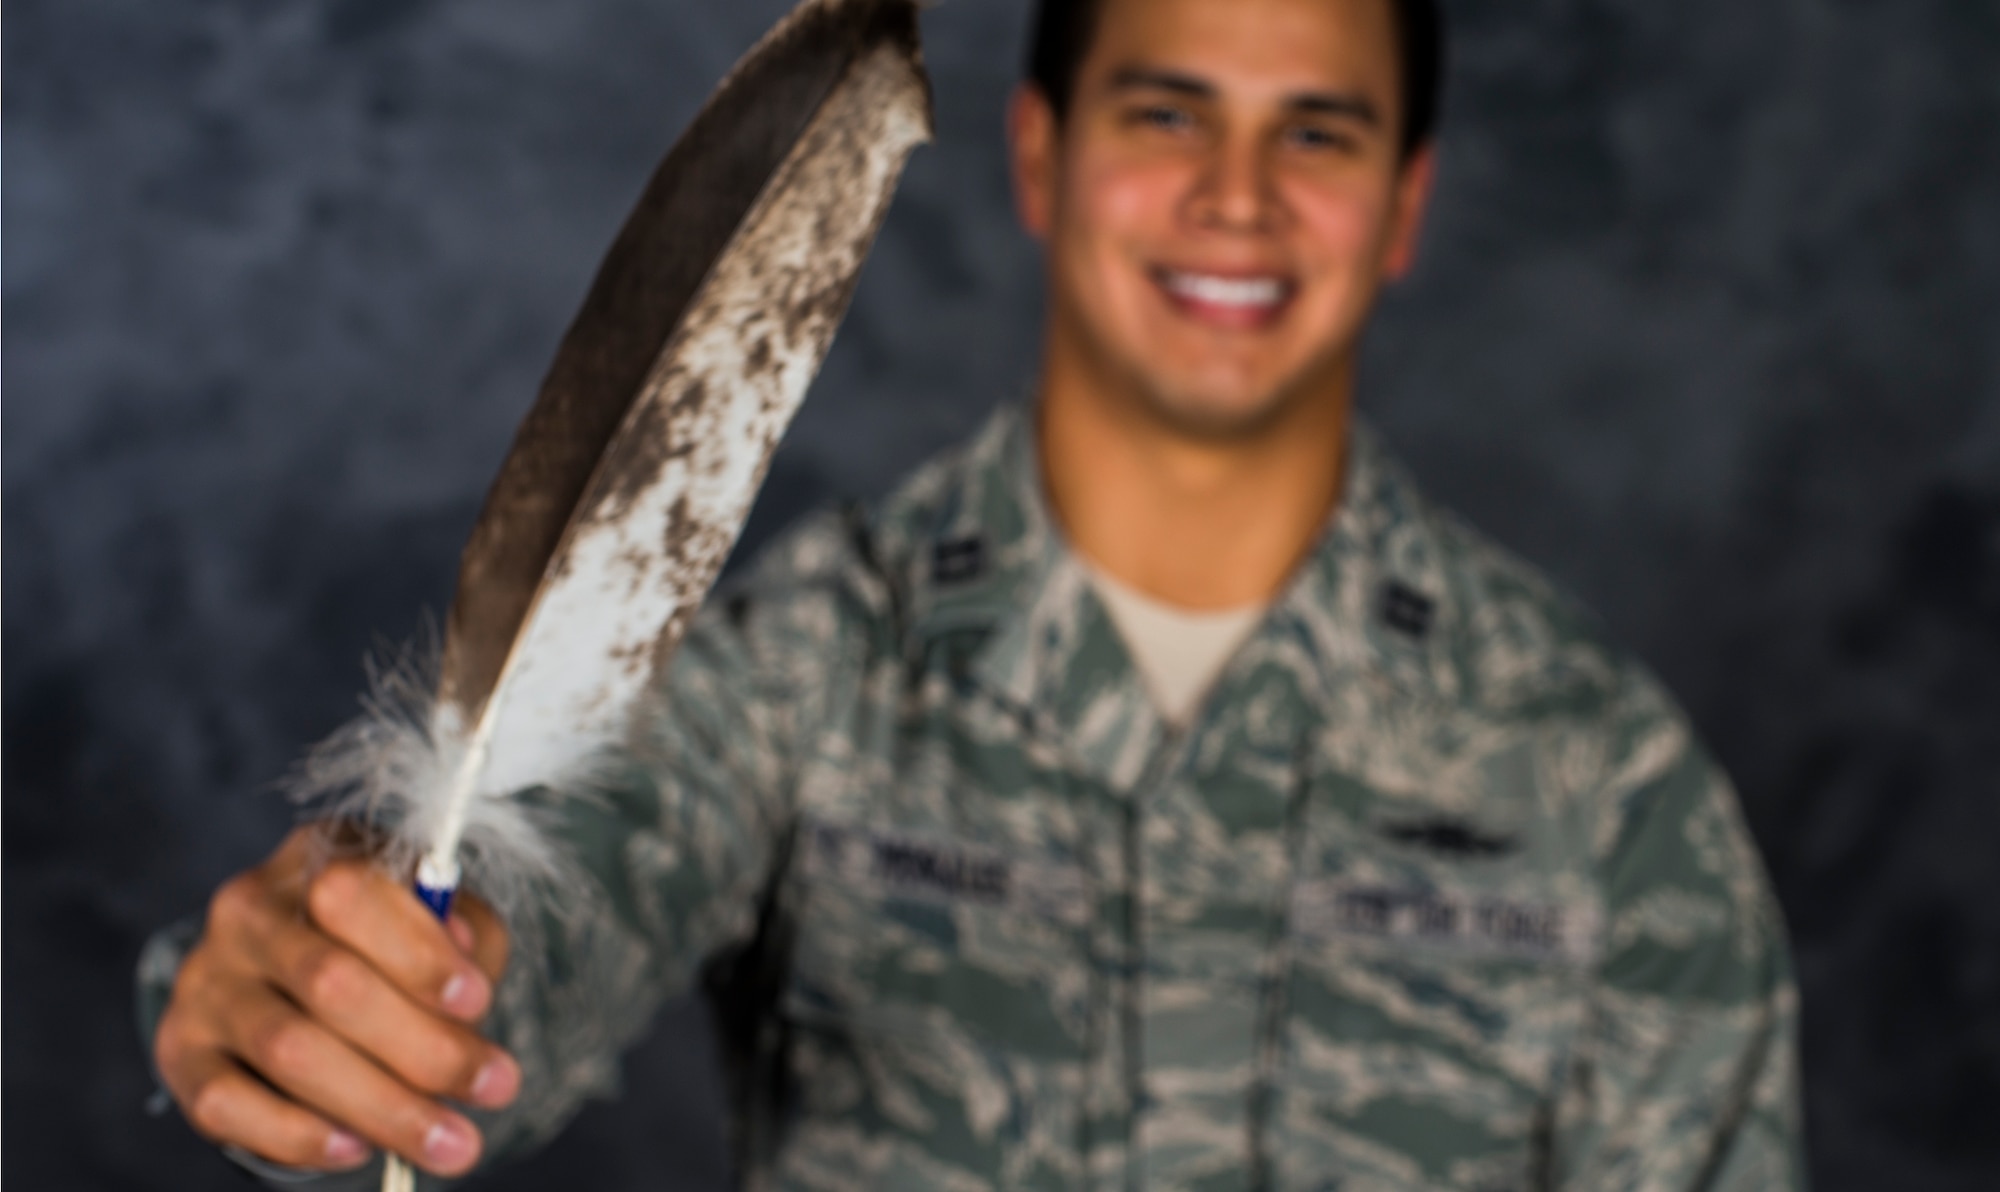 U.S. Air Force Capt. Myles Morales, 336th Recruiting Squadron support flight commander, poses for a photo holding his eagle feather Dec. 3, 2014, at Moody Air Force Base, Ga. Morales received the eagle feather during a naming ceremony held in his honor by the Lakota Sioux tribe on Standing Rock Reservation, South Dakota. (U.S. Air Force photo by Airman 1st Class Ceaira Tinsley/Released)